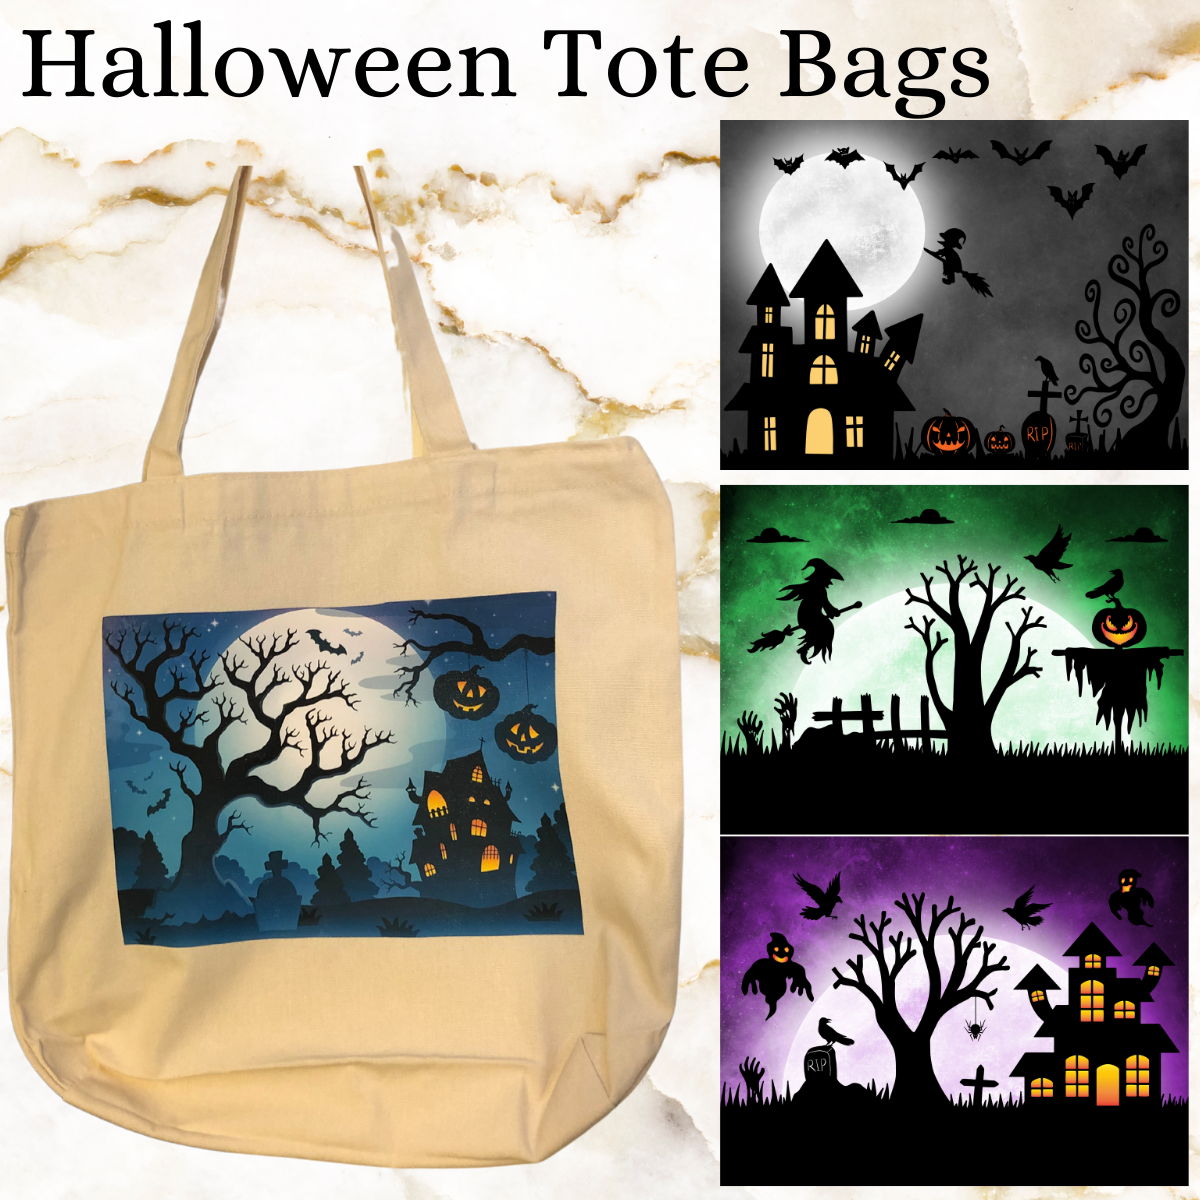 Tote bag with blue halloween image of creepy tree, jackolanters and hause with other option images on the side